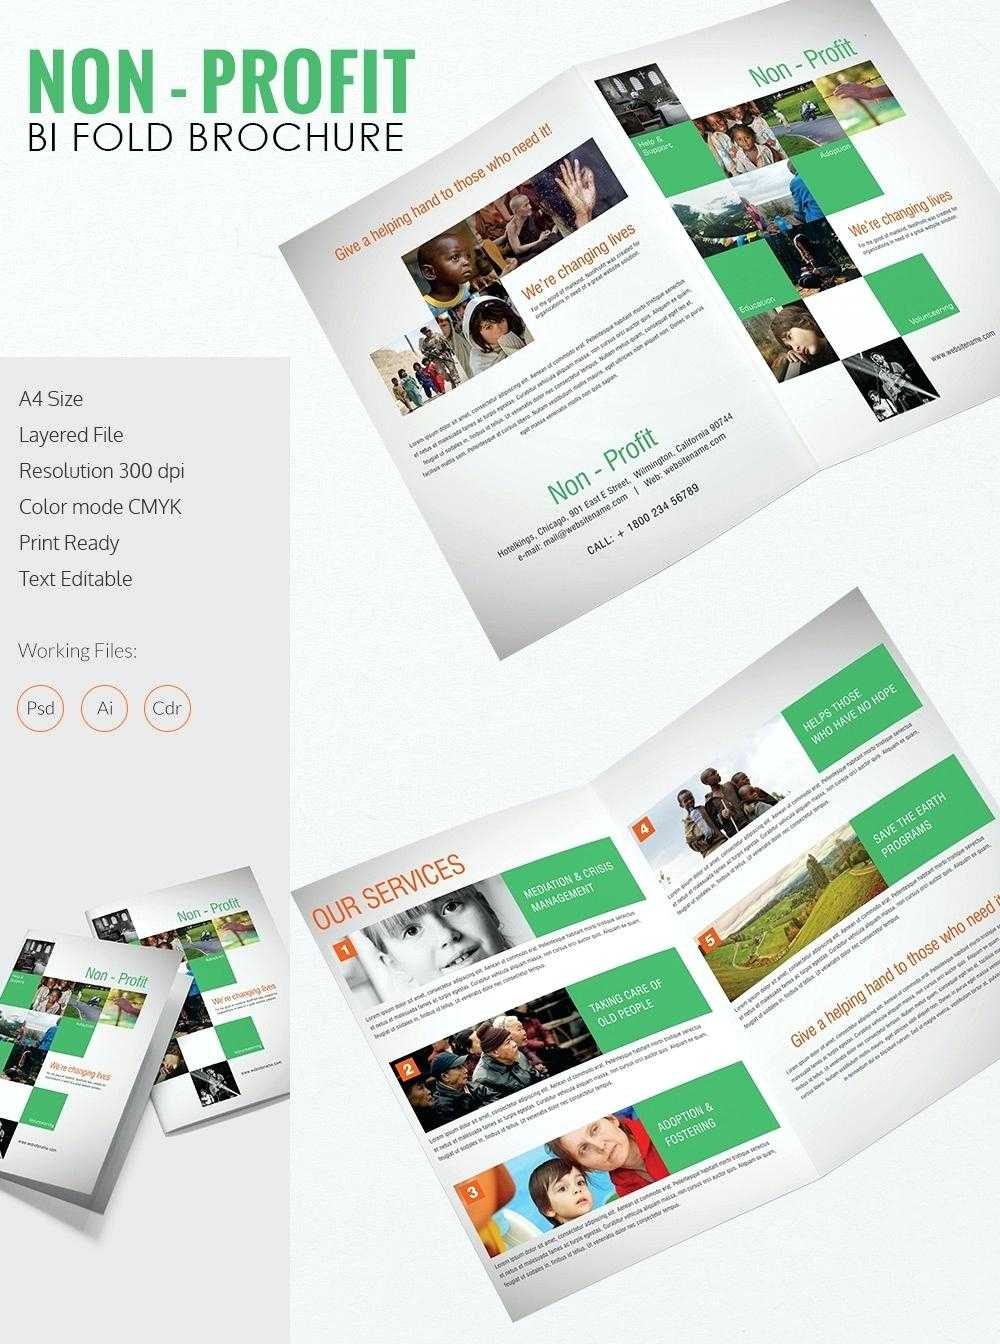 Two Fold Brochure Template Free Download – Vmarques Inside Microsoft Word Brochure Template Free